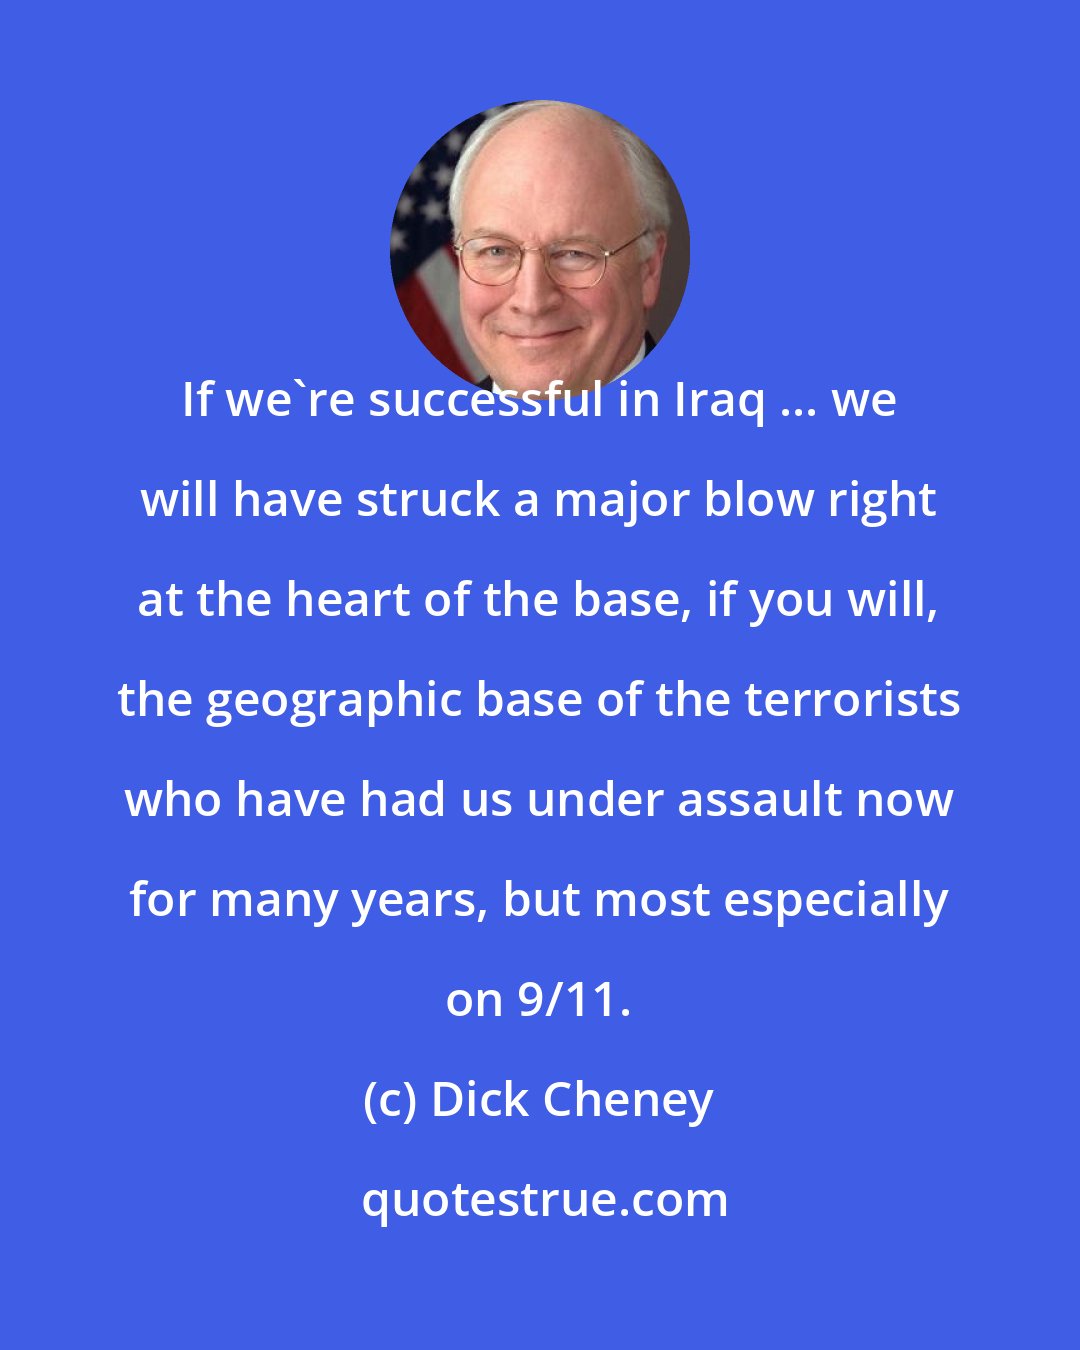 Dick Cheney: If we're successful in Iraq ... we will have struck a major blow right at the heart of the base, if you will, the geographic base of the terrorists who have had us under assault now for many years, but most especially on 9/11.